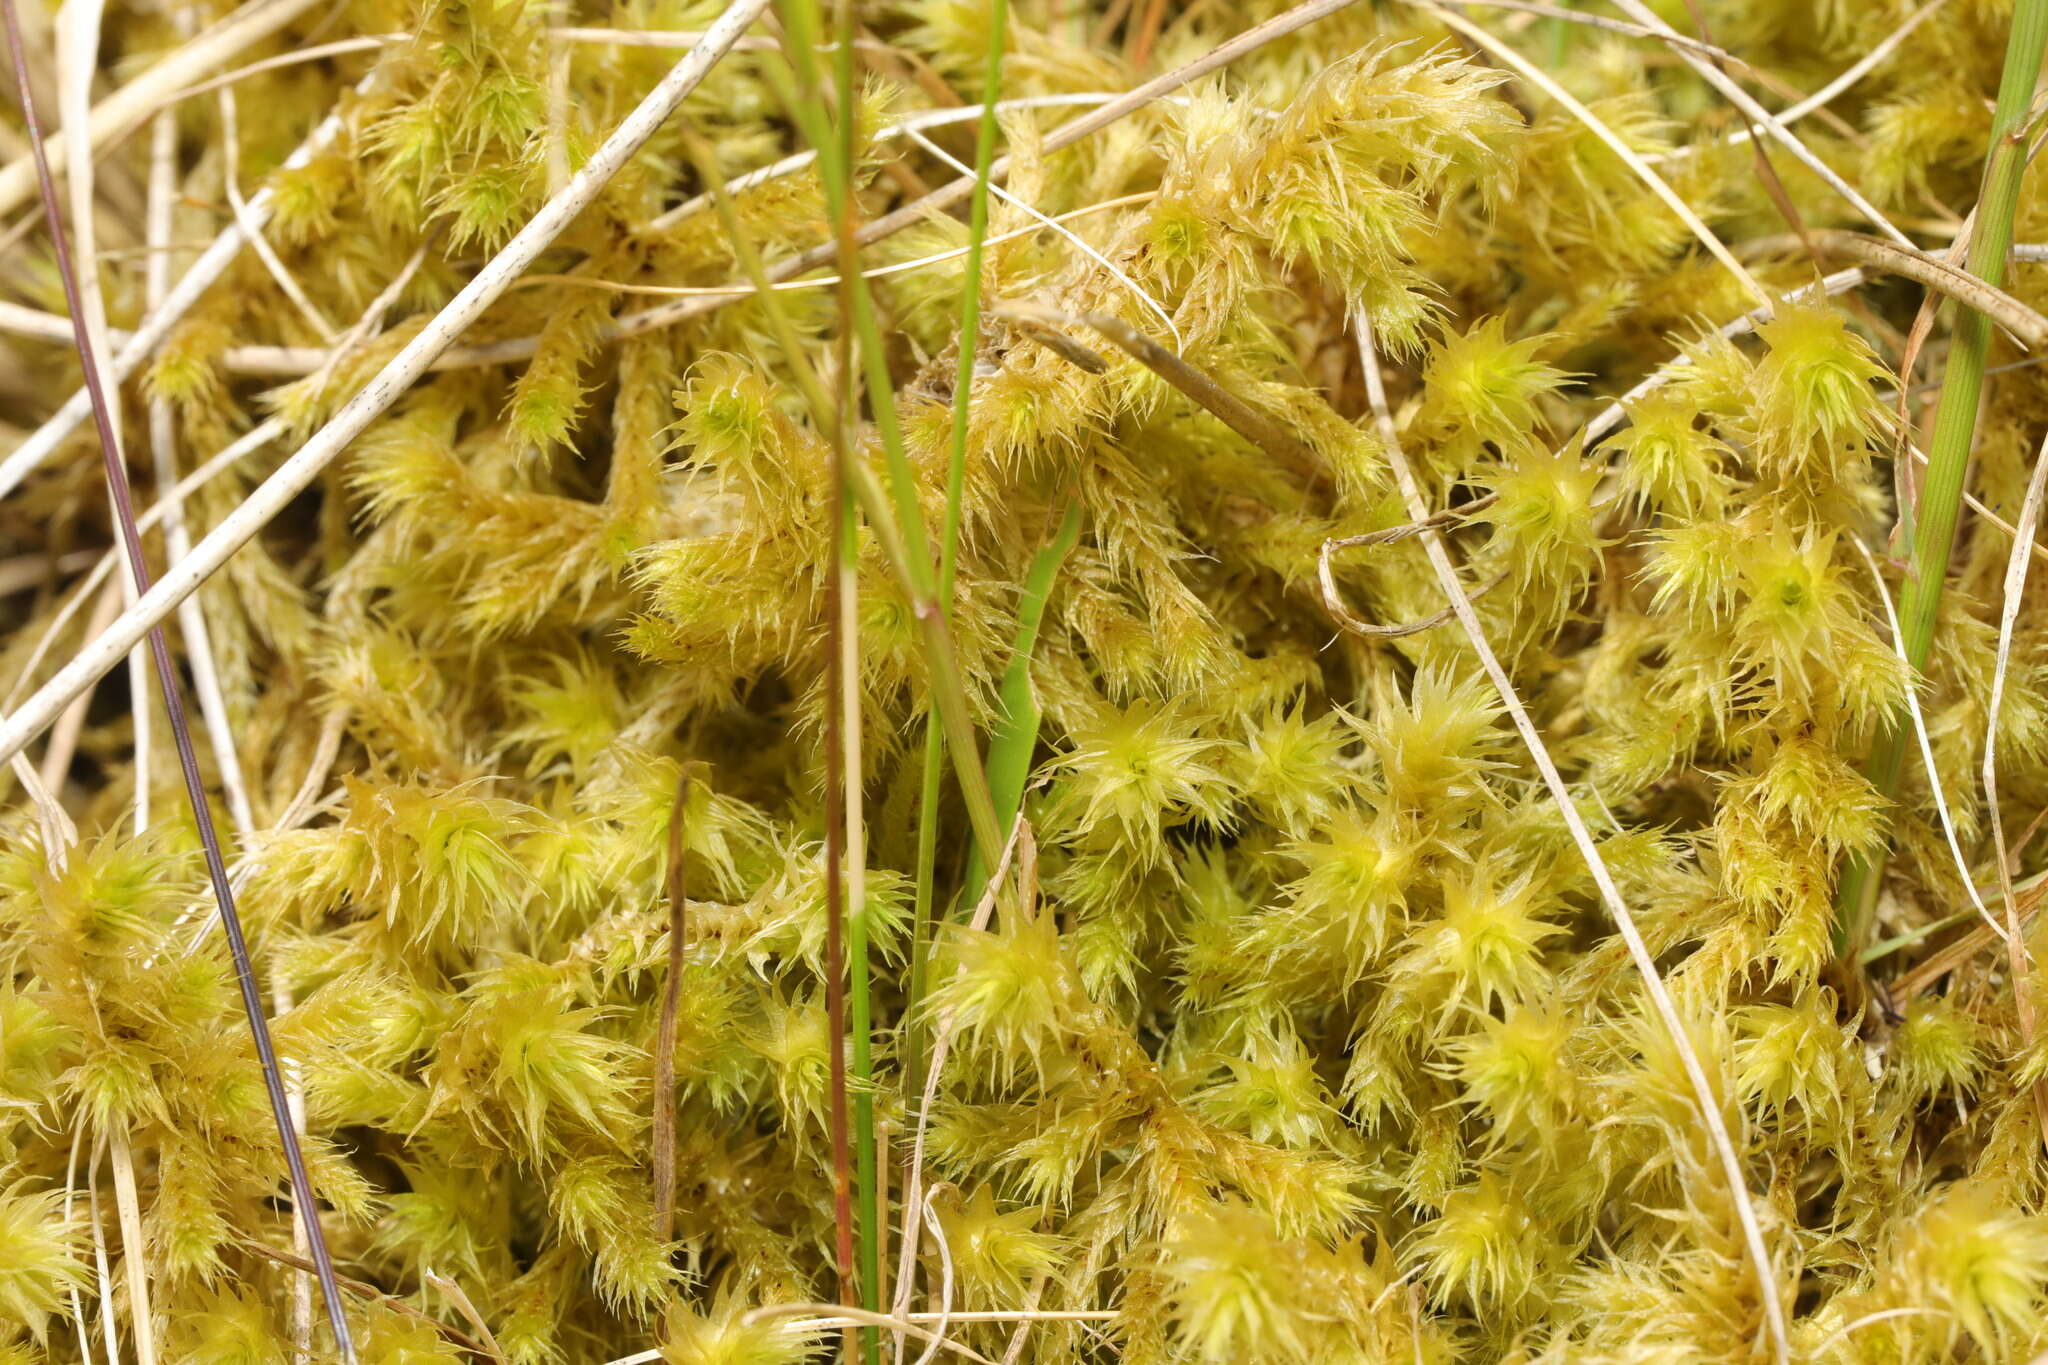 Image of Electrified Cat's Tail Moss